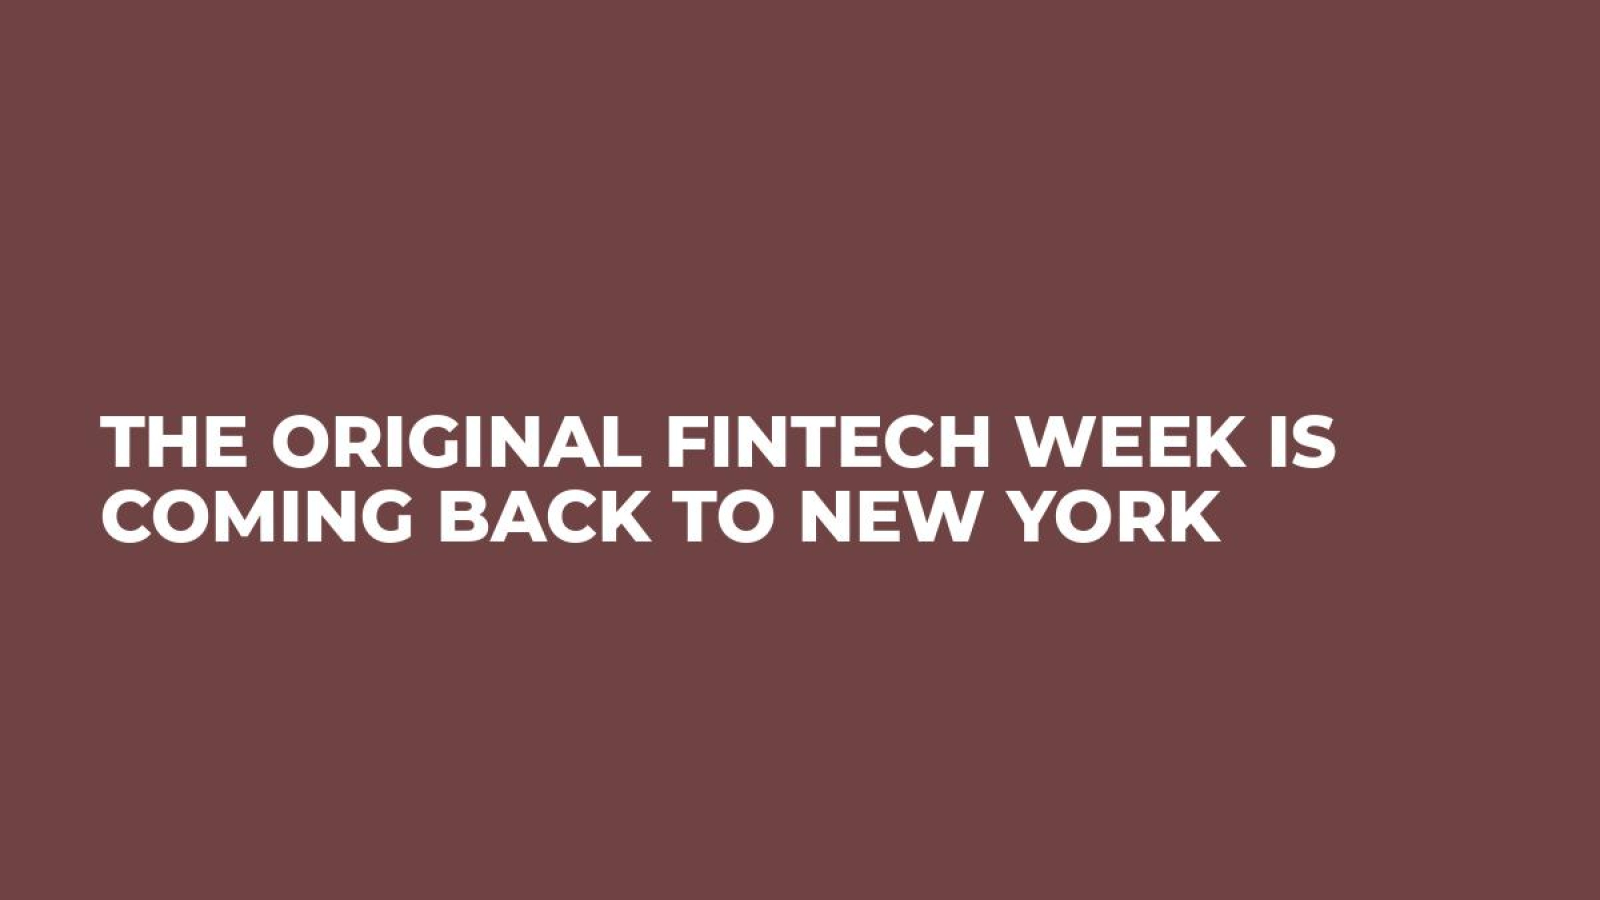 THE ORIGINAL FINTECH WEEK IS COMING BACK TO NEW YORK